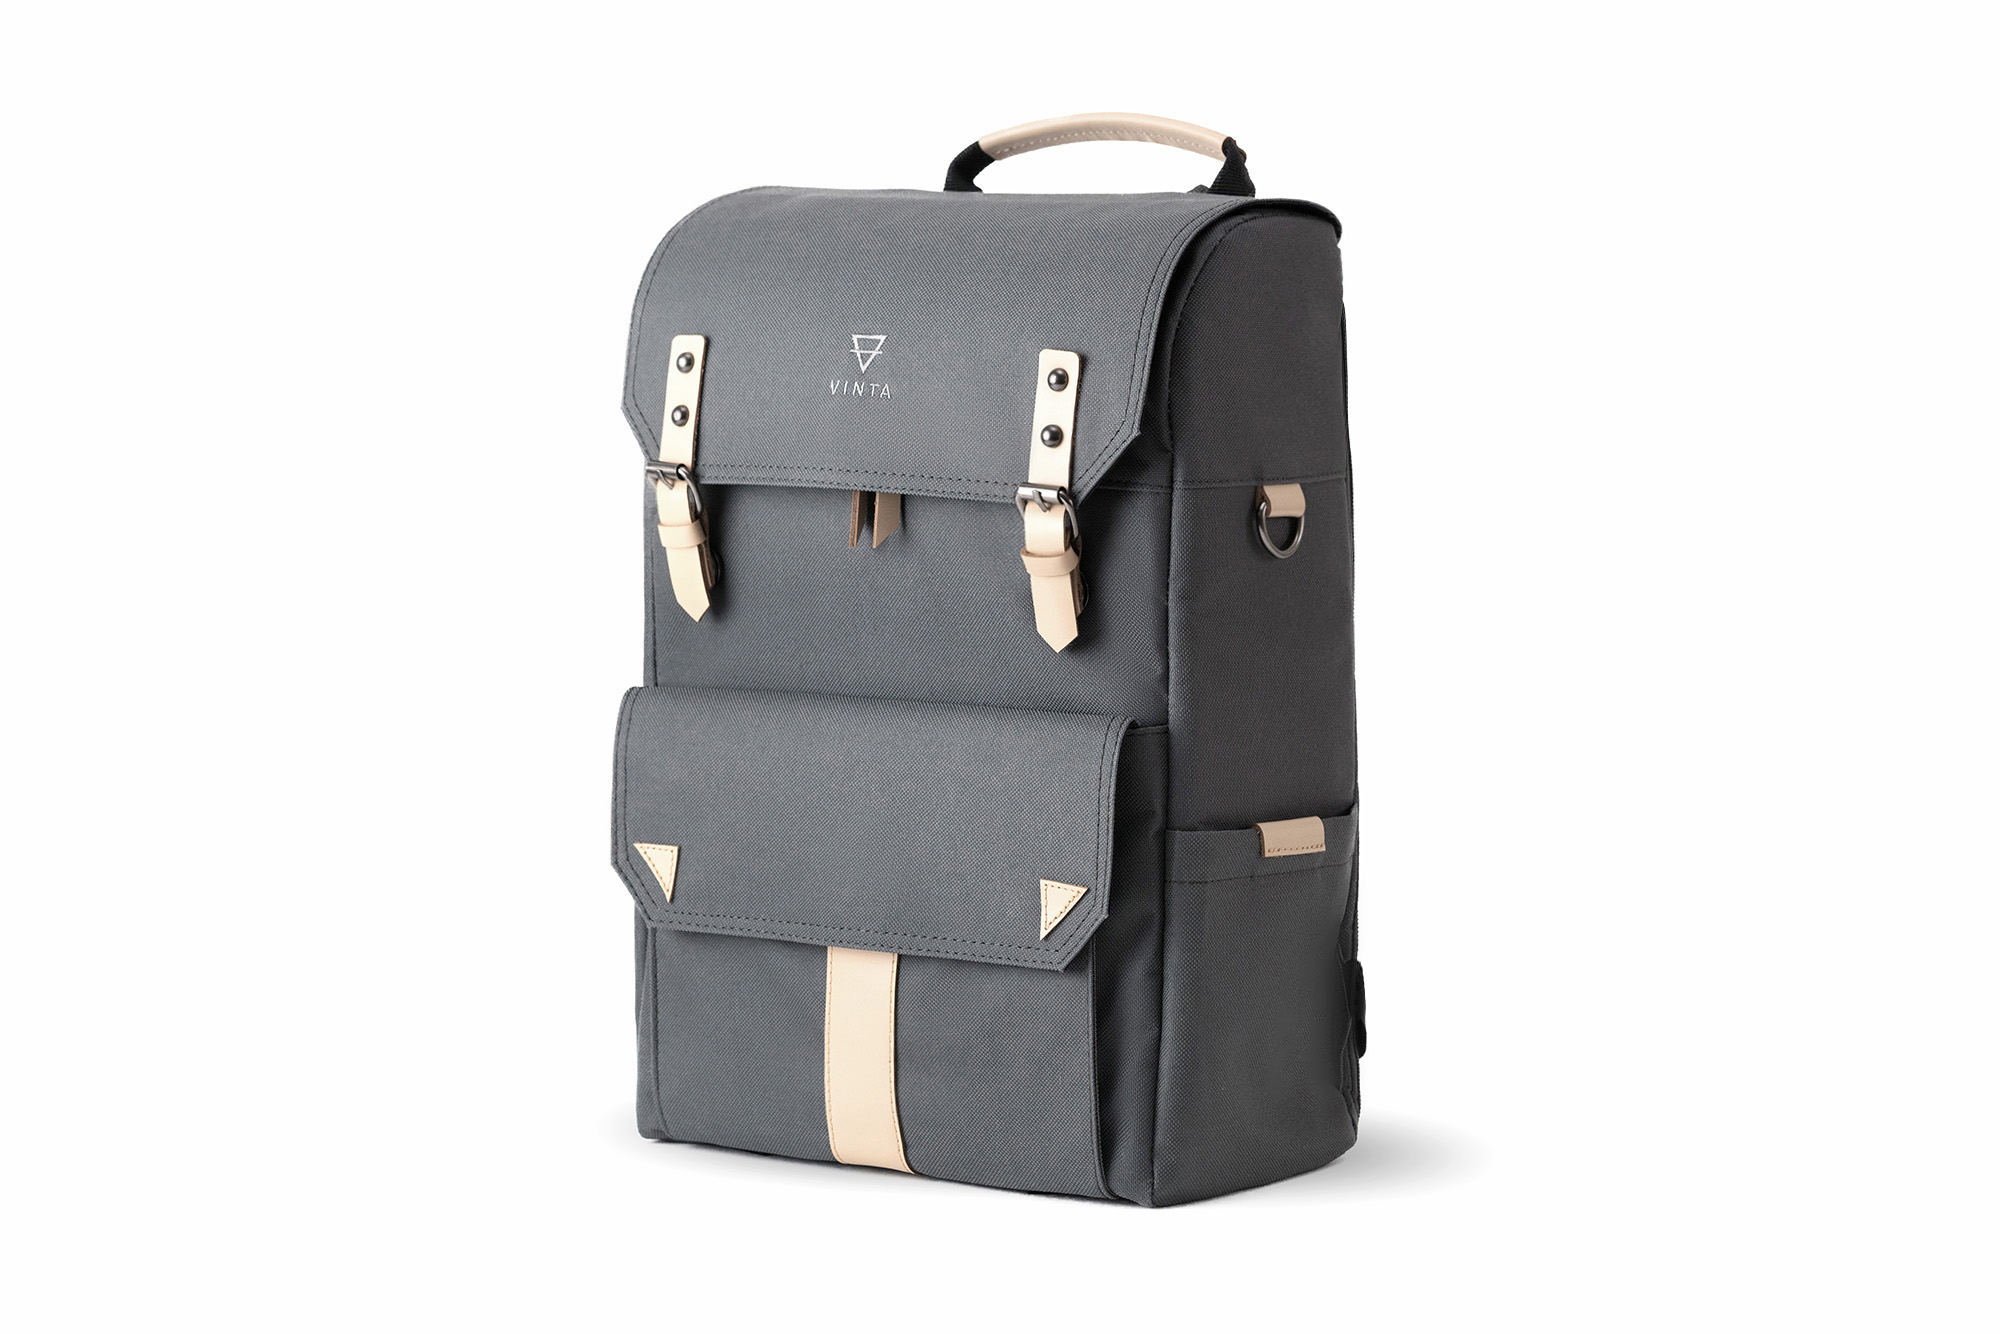 Vinta.co camera bag great gift ideas for photography lovers